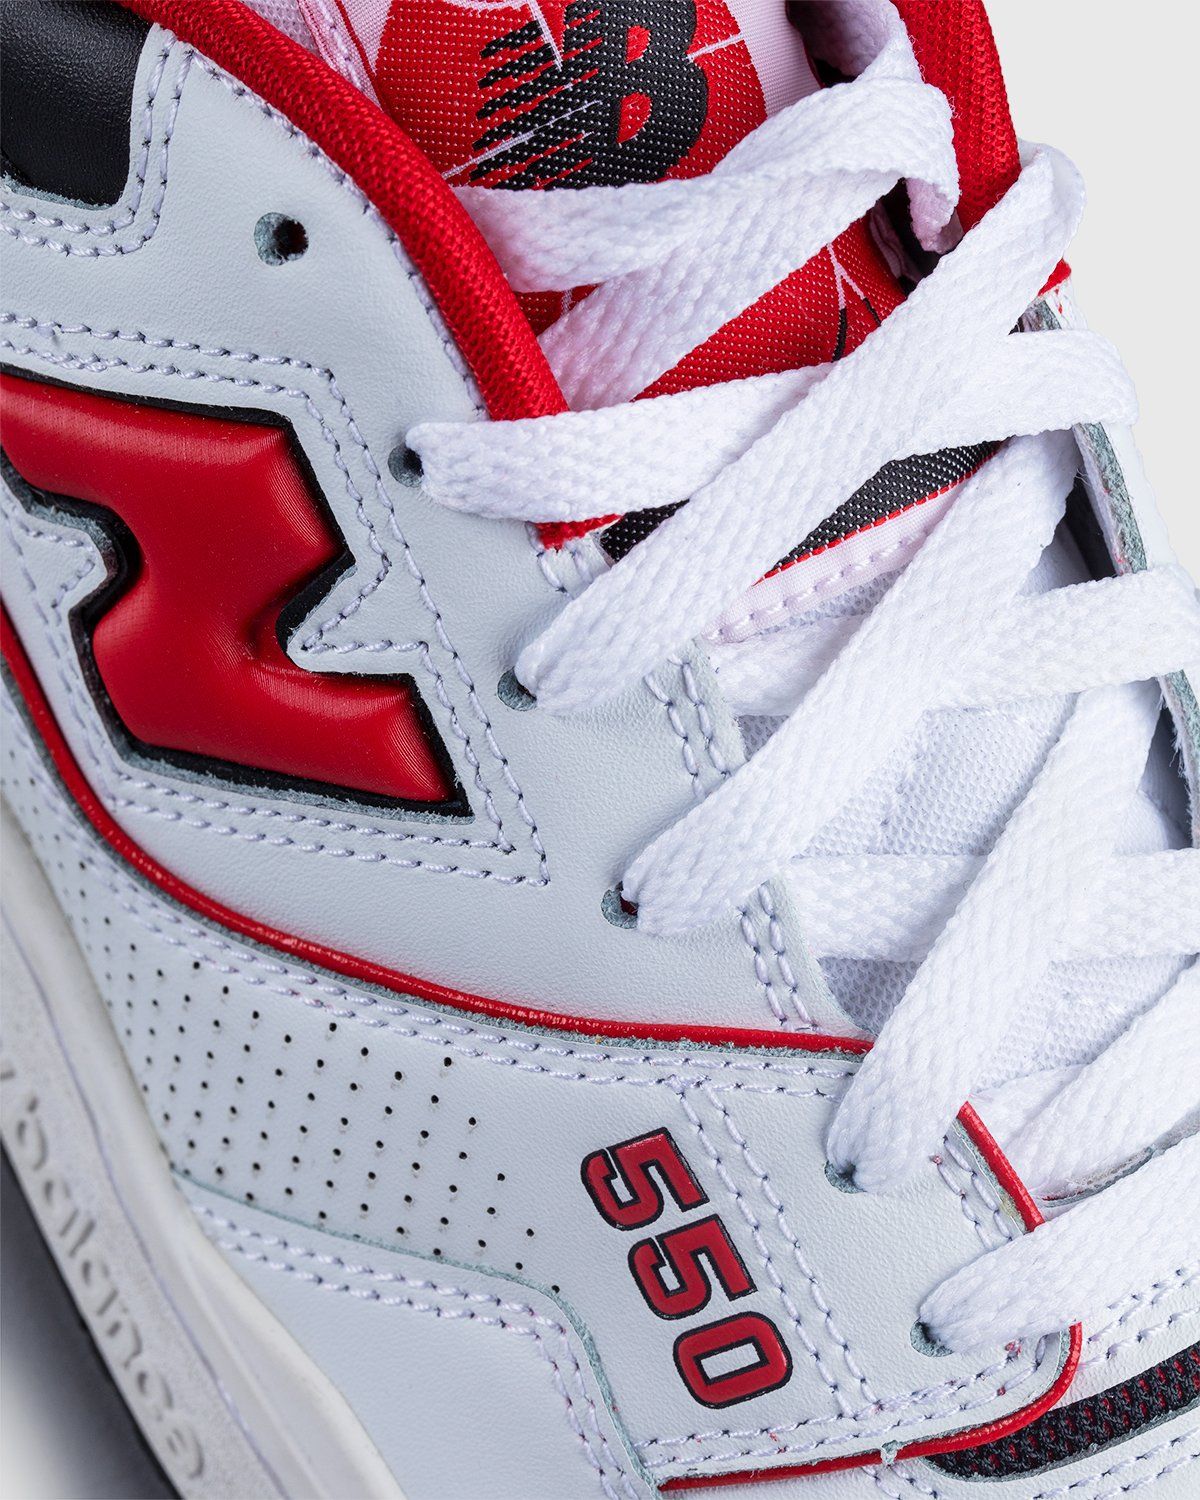 New Balance – BB550HR1 White Red Black - Sneakers - White - Image 6